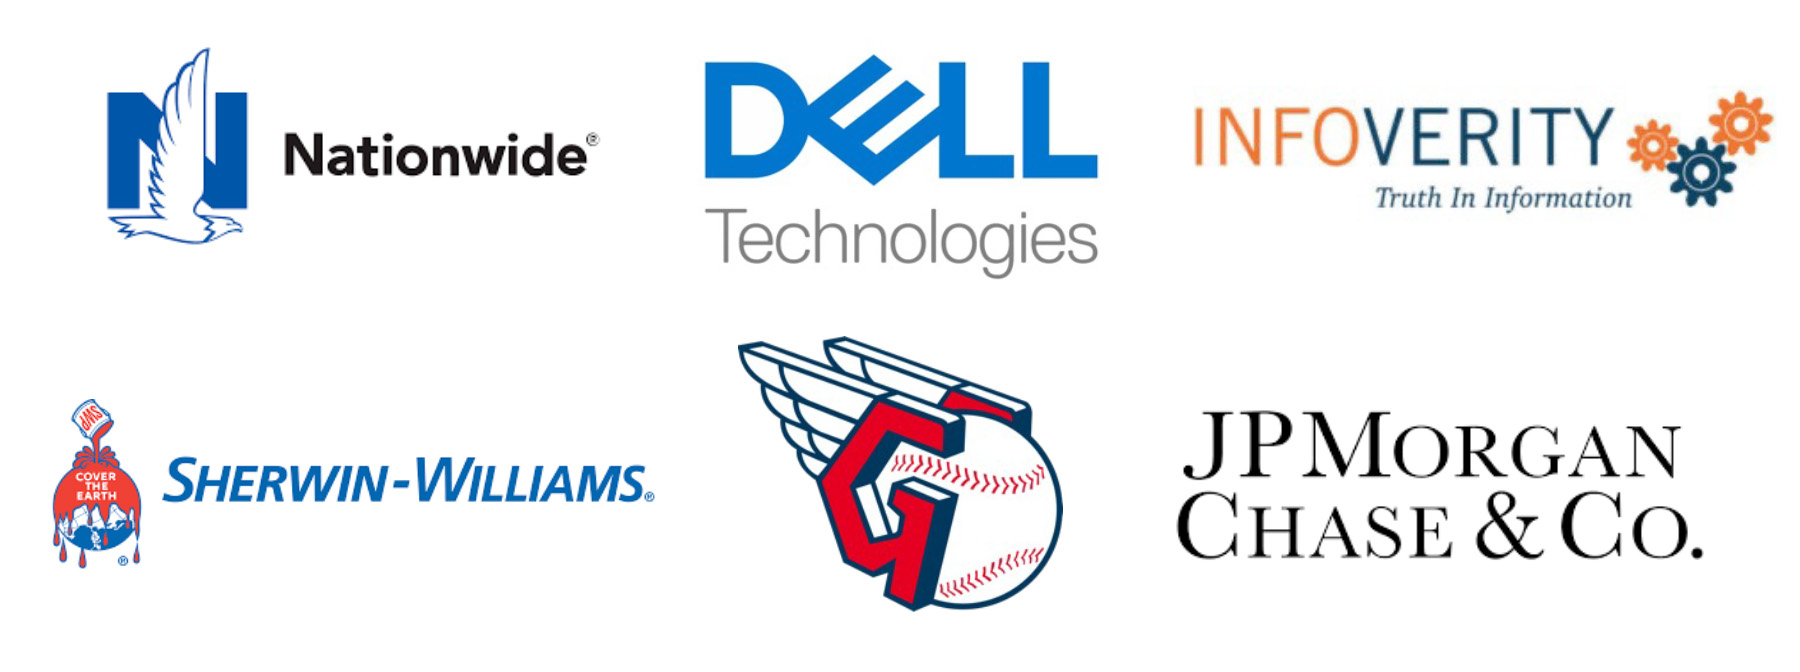 Logos for Nationwide, Dell Technologies, Infoverity, Sherwin-Williams, the Cleveland Guardians, and JP Morgan Chase & Co.